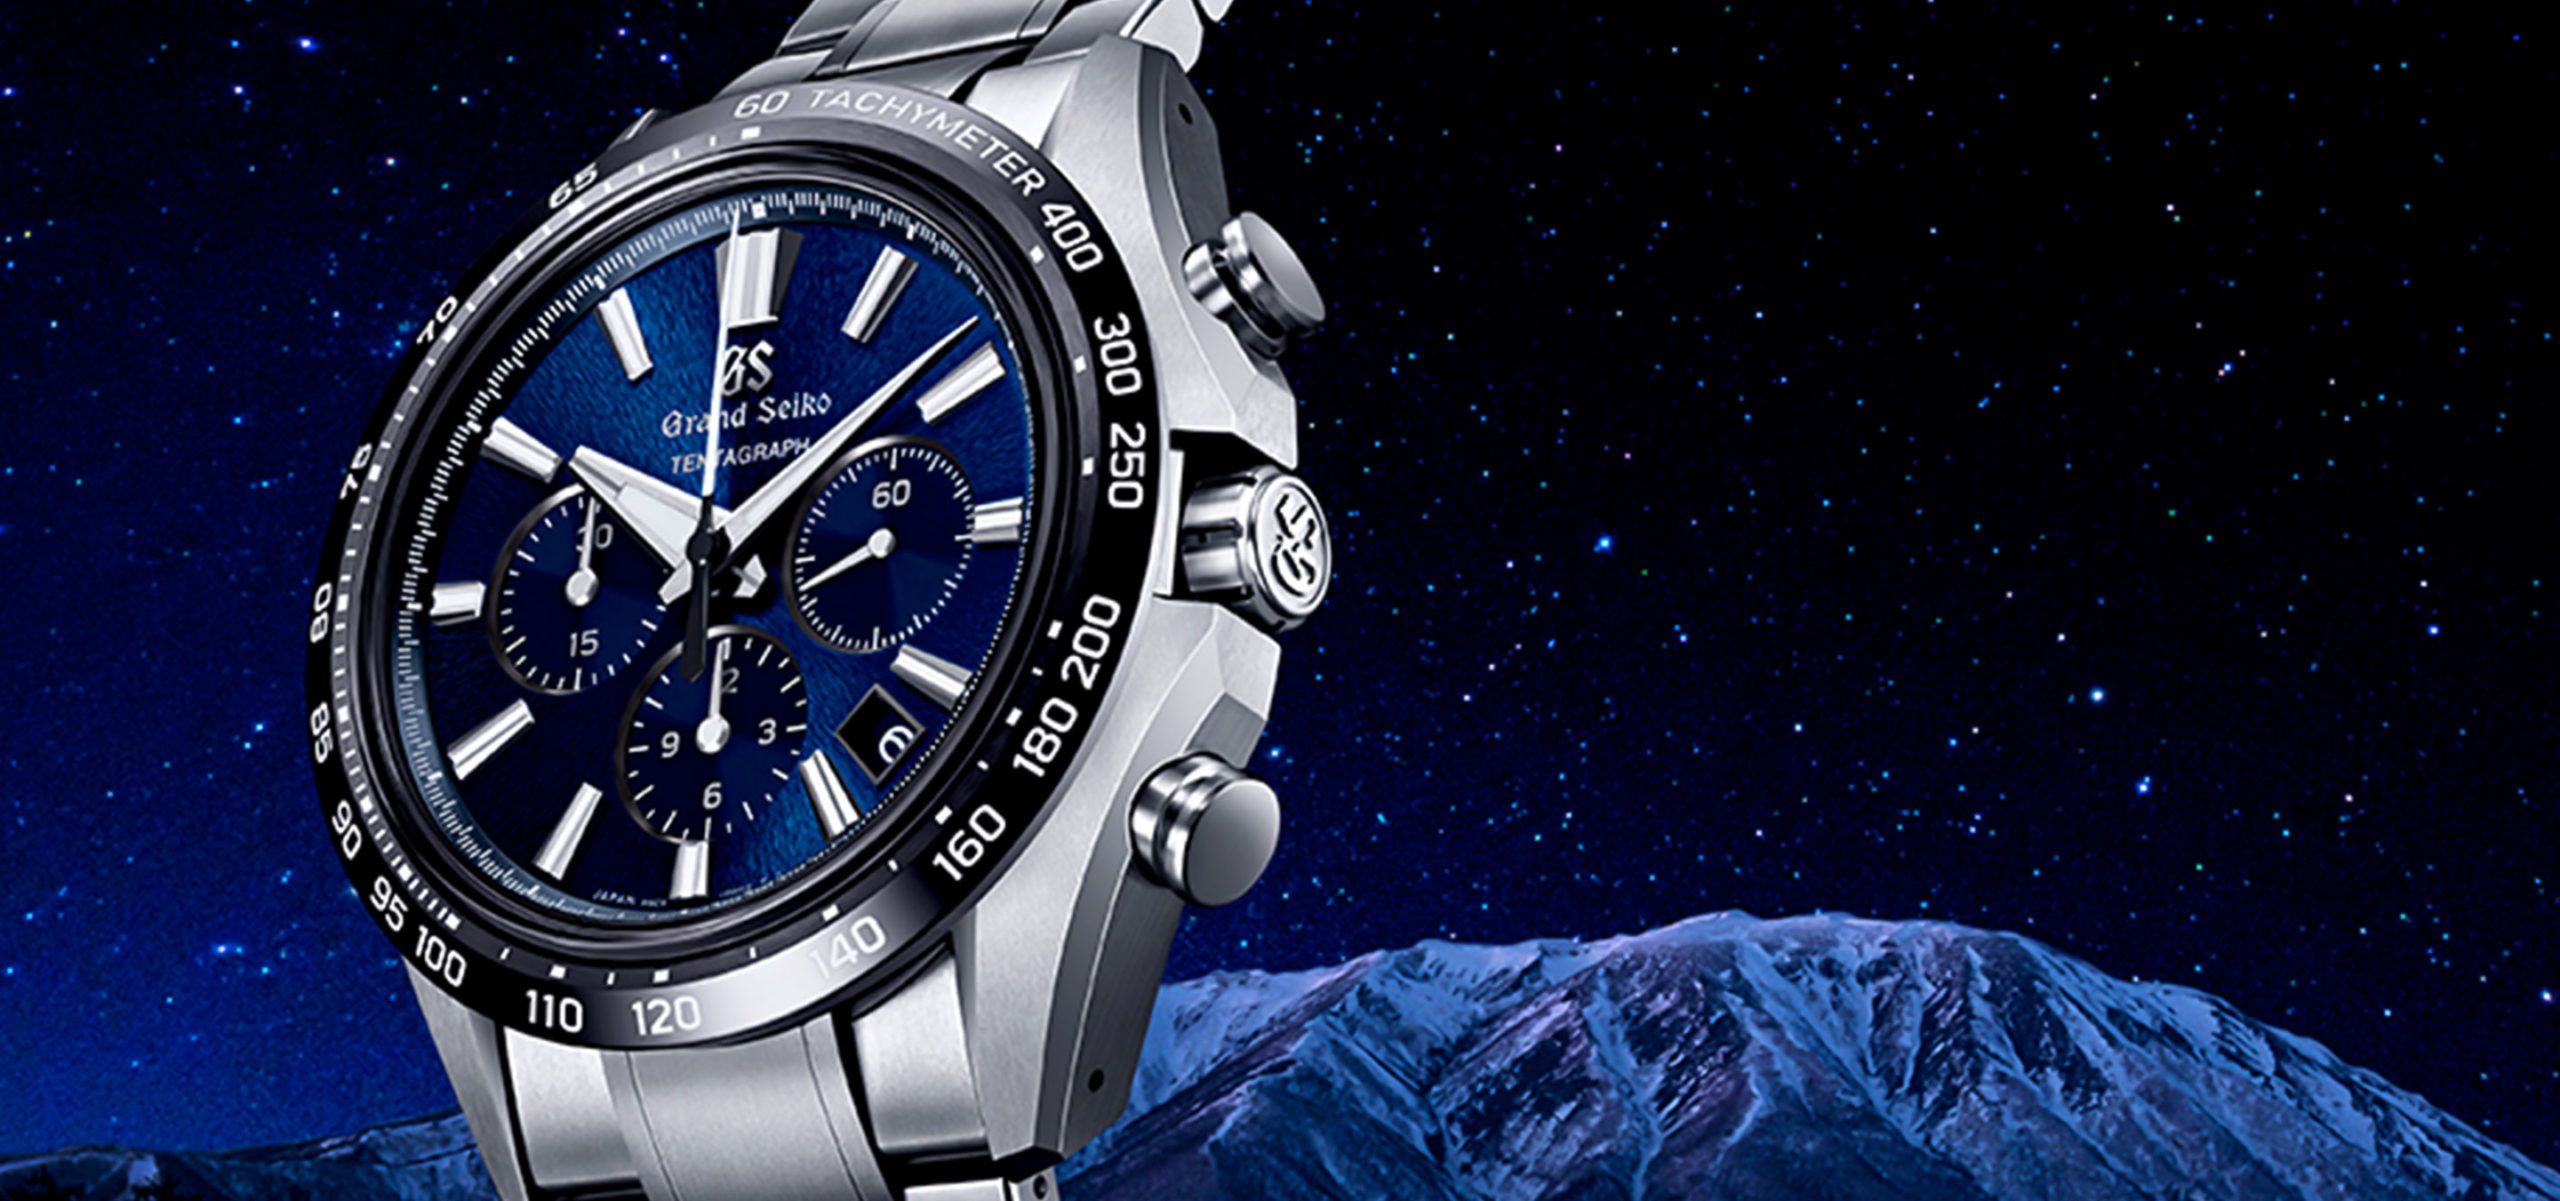 Behold The Tentagraph: Grand Seiko's Leap Into A New Era Of Mechanical Chronographs